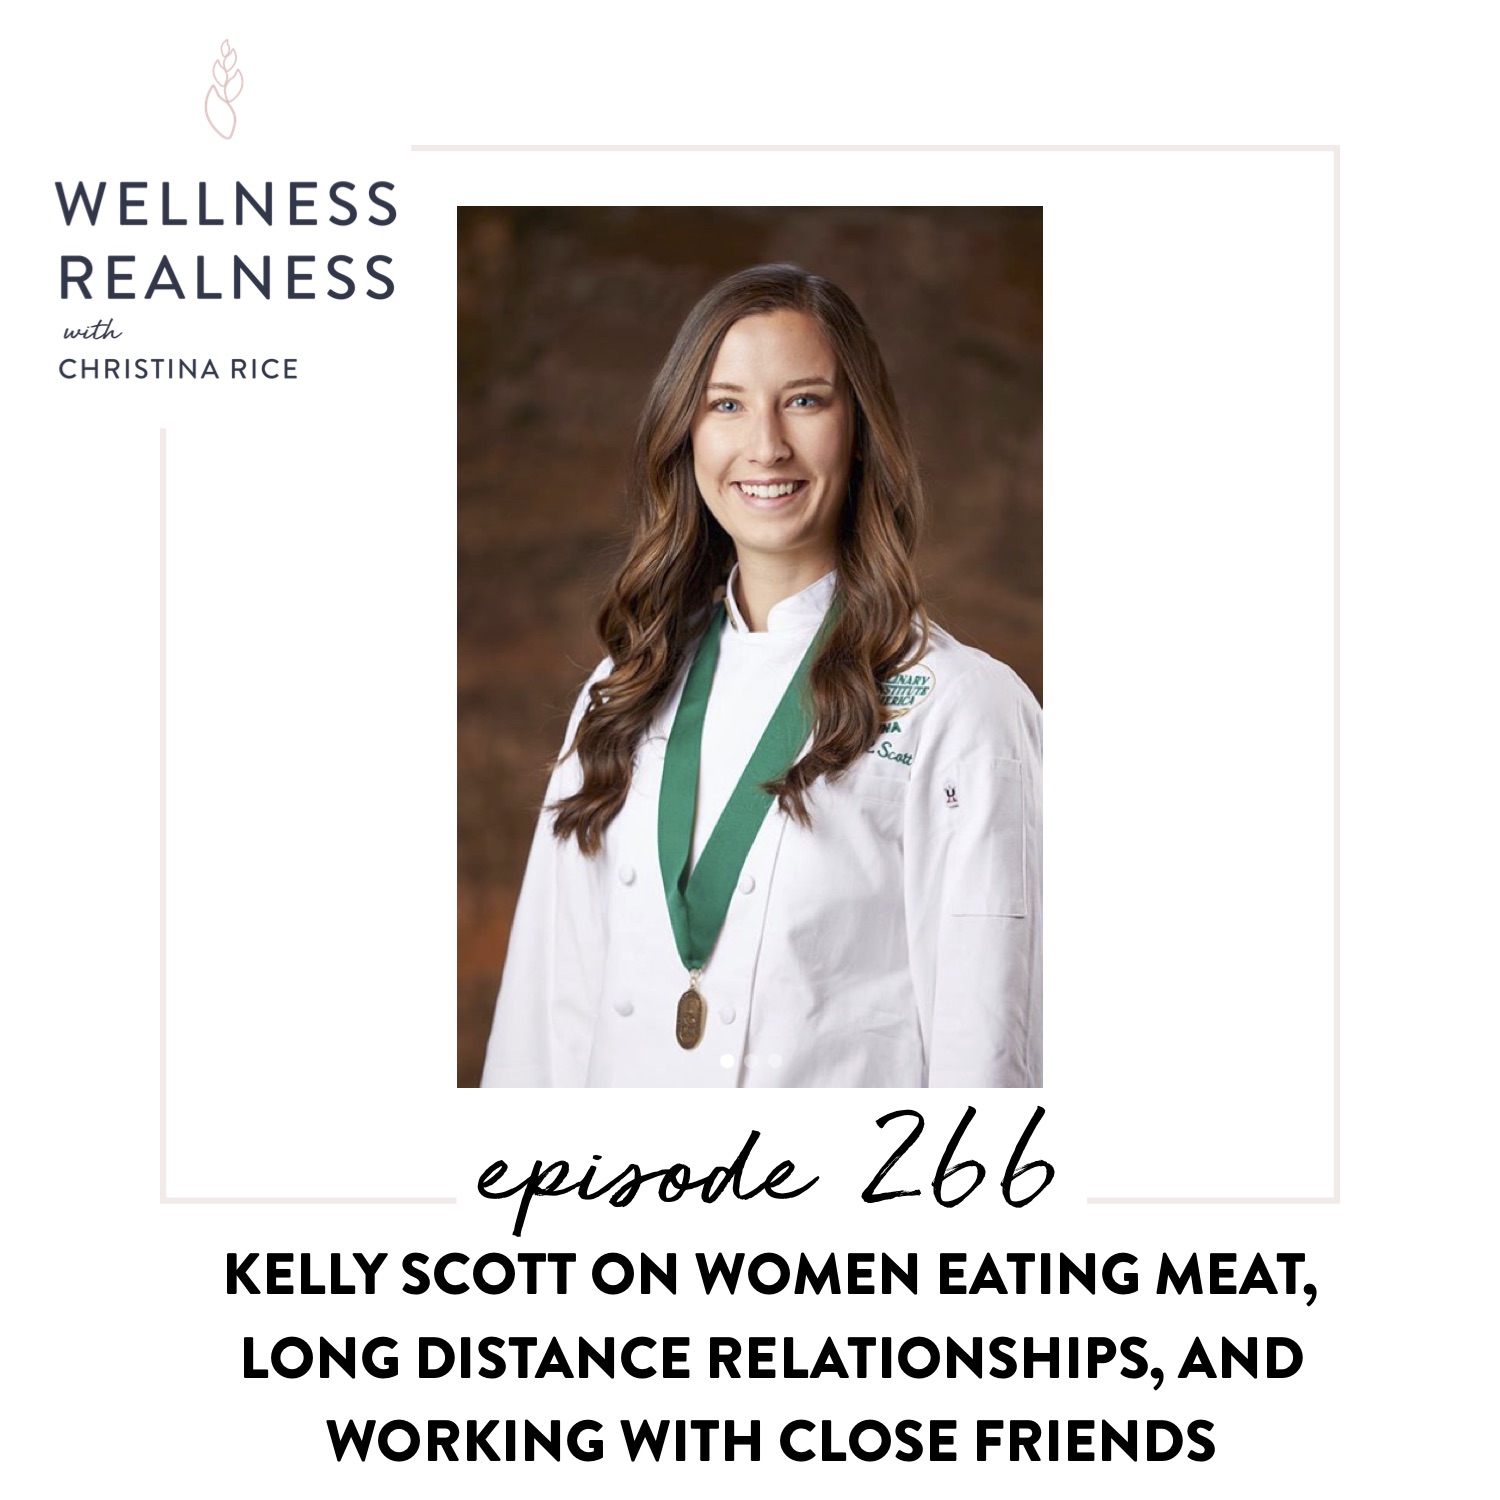 266: Kelly Scott on Women Eating Meat, Long Distance Relationships, and Working with Close Friends